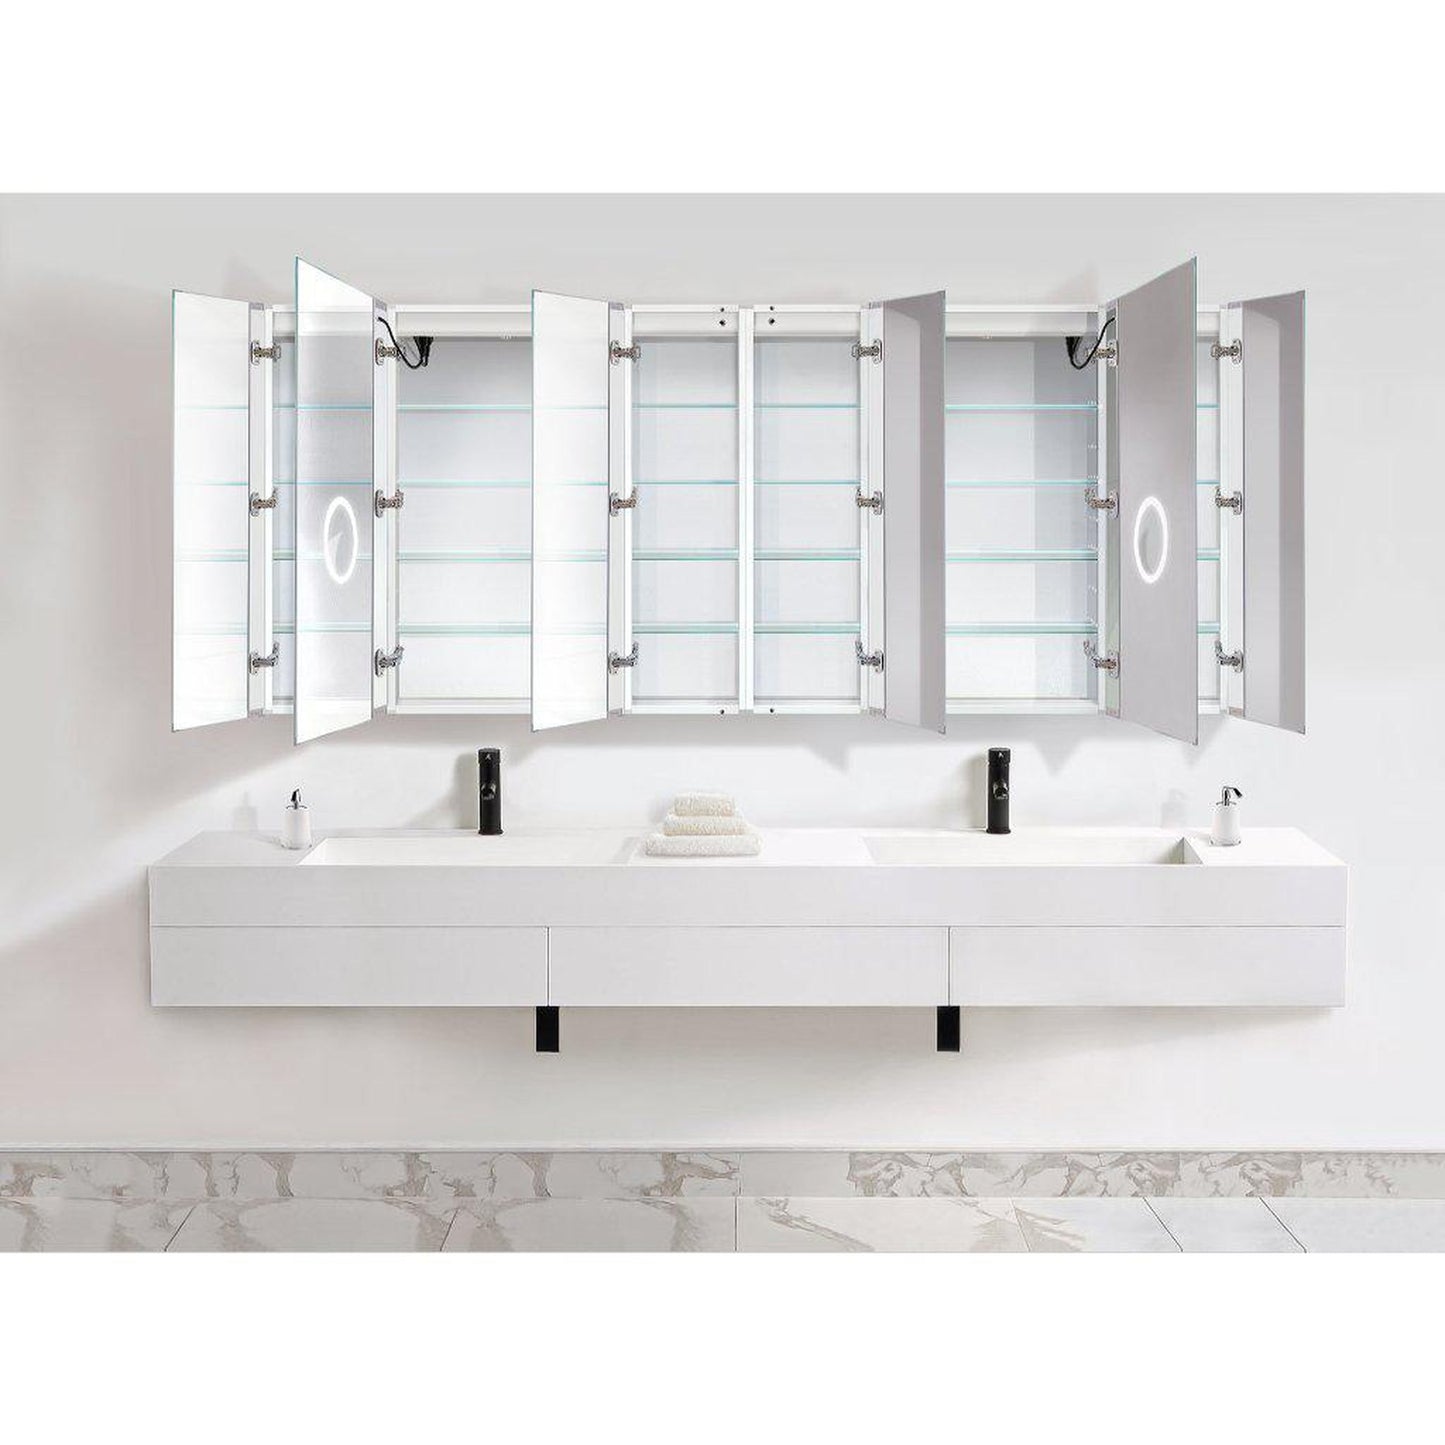 Krugg Reflections Svange 96" x 42" 5000K Double Hexa-View Left-Left-Left-Right-Right-Right Opening Recessed/Surface-Mount Illuminated Silver Backed LED Medicine Cabinet Mirror With Built-in Defogger, Dimmer and Electrical Outlet